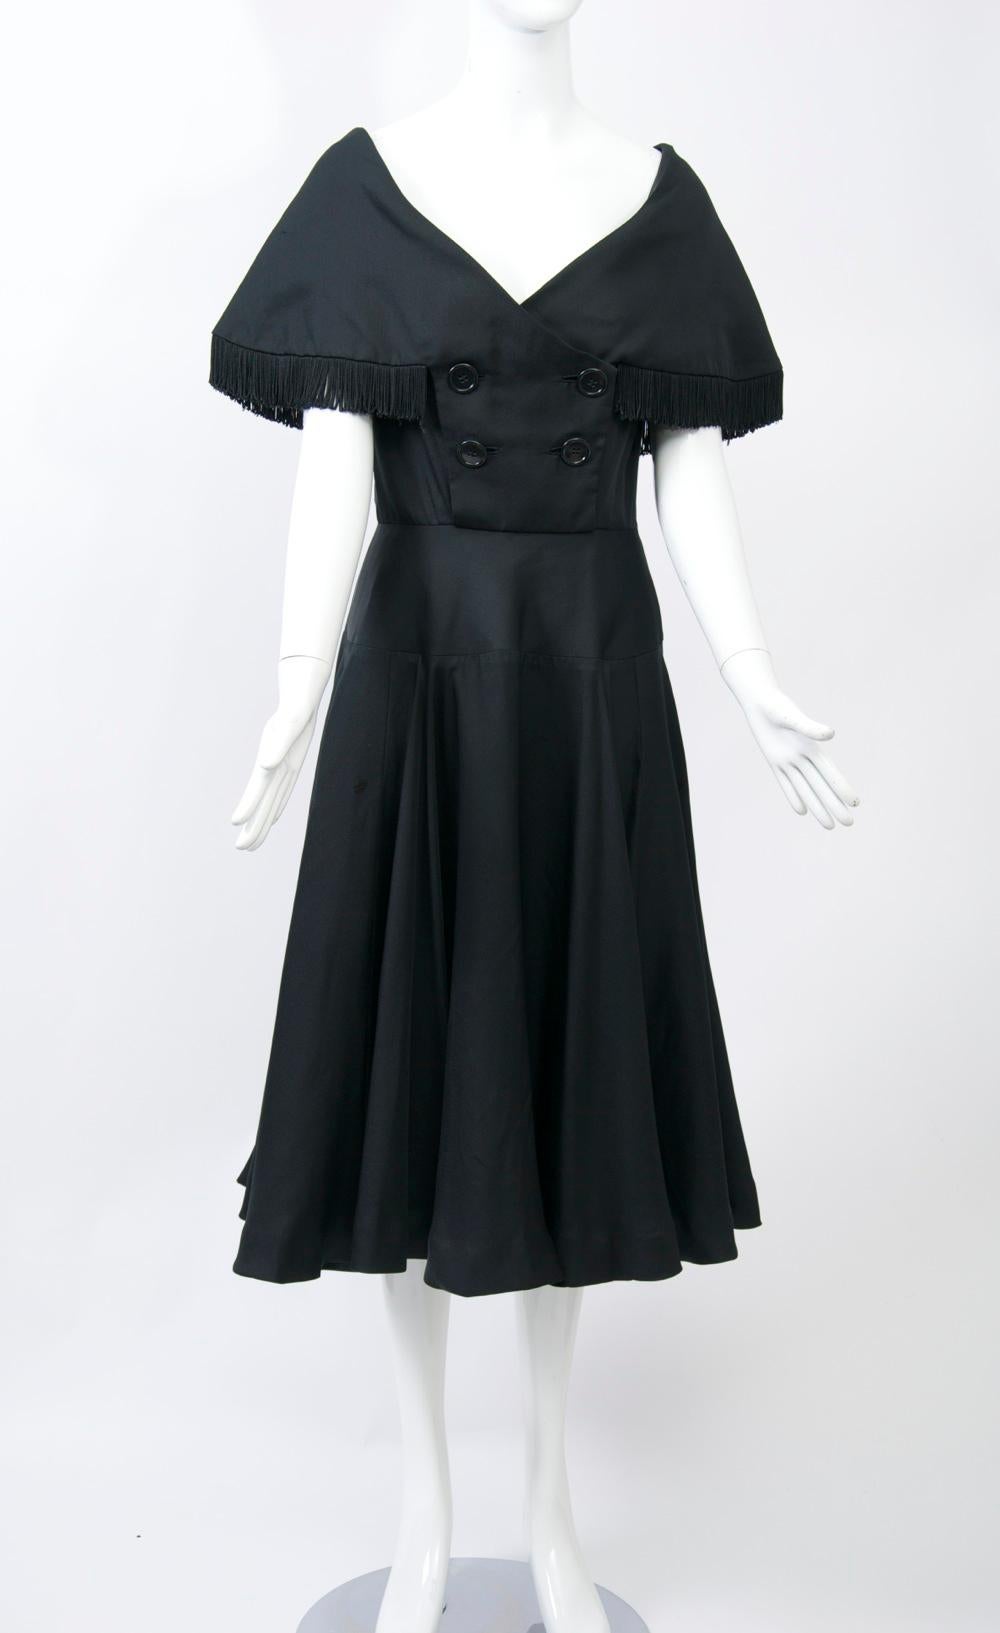 Jacques Fath designed two lines of ready-to-wear per year for NY manufacturer Joseph Halper from 1949 through the mid 1950s. This black dress features some outstanding details, from its fringed cape collar and decolletage neckline to its